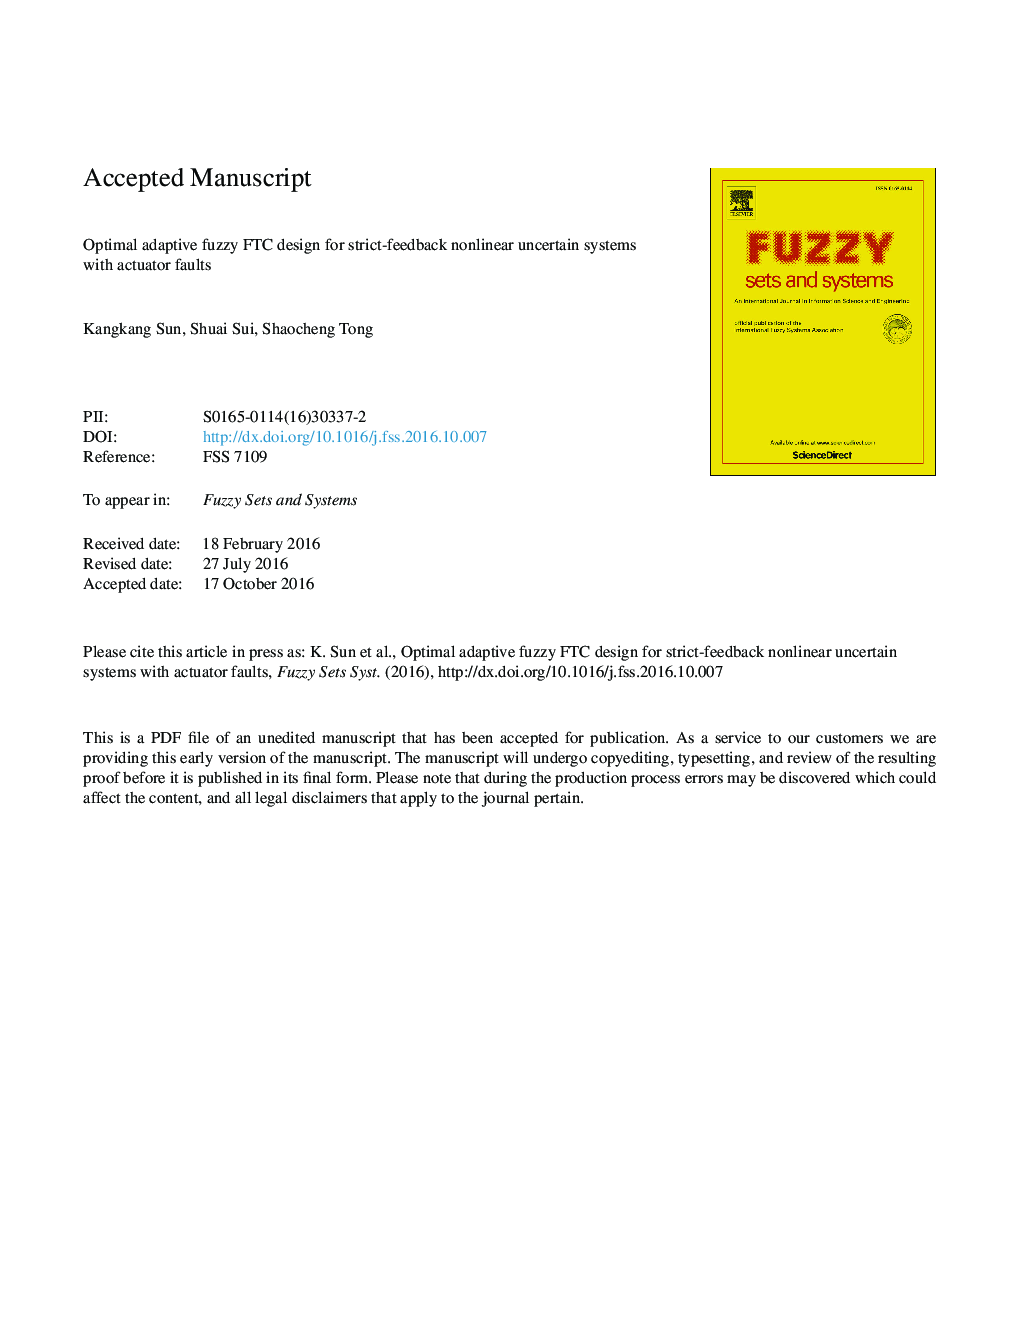 Optimal adaptive fuzzy FTC design for strict-feedback nonlinear uncertain systems with actuator faults